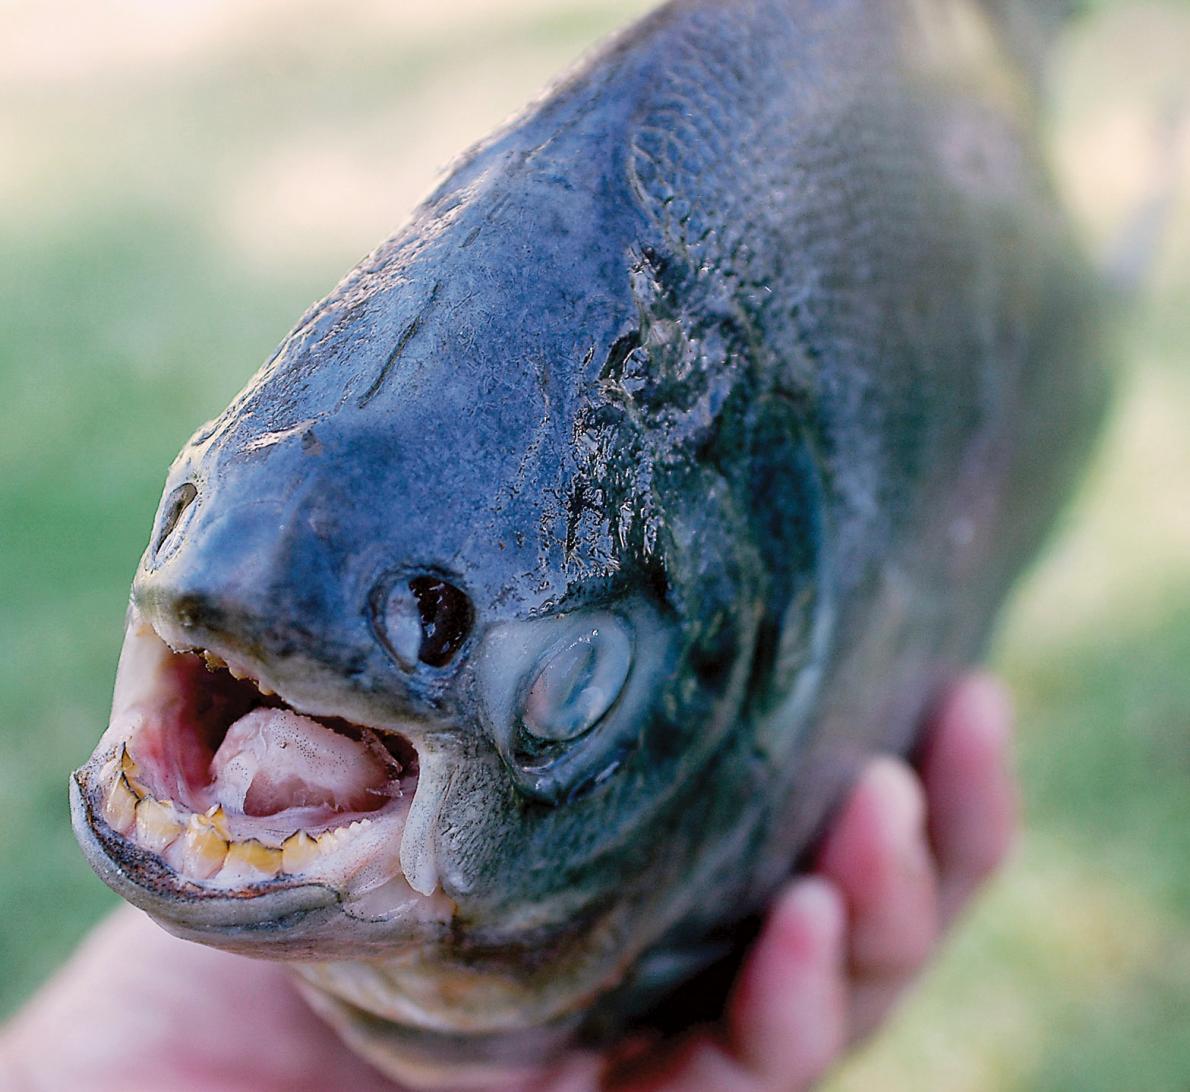 Pacu found in Arizona and New Jersey. Image Courtesy of news.nationalgeographic.com.